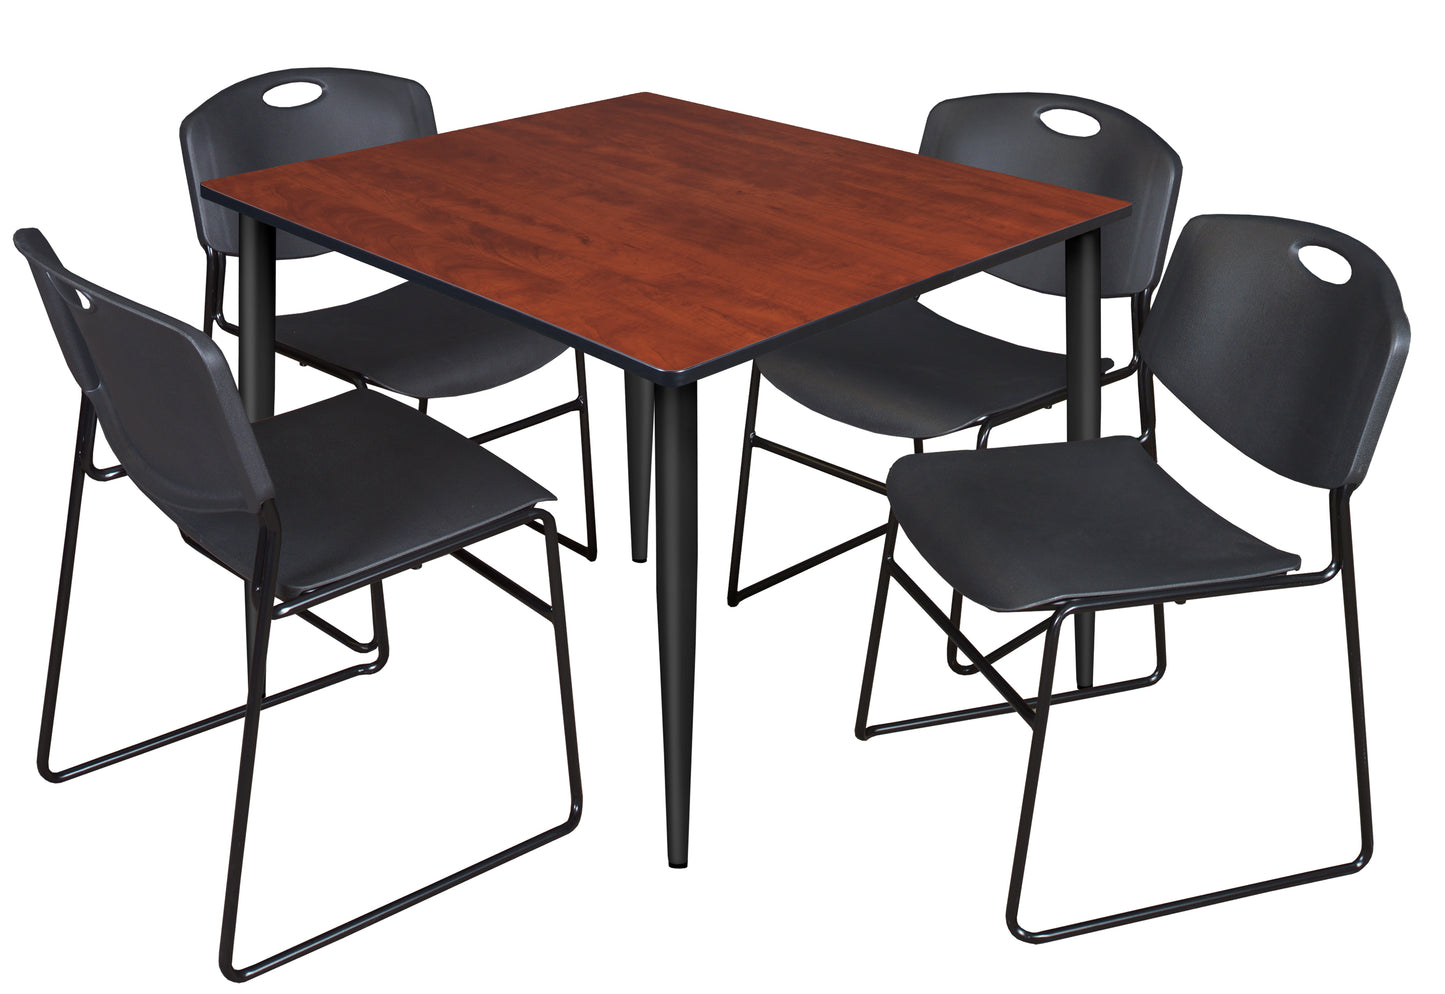 Regency Kahlo 48 in. Square Breakroom Table & 4 Zeng Stack Chairs